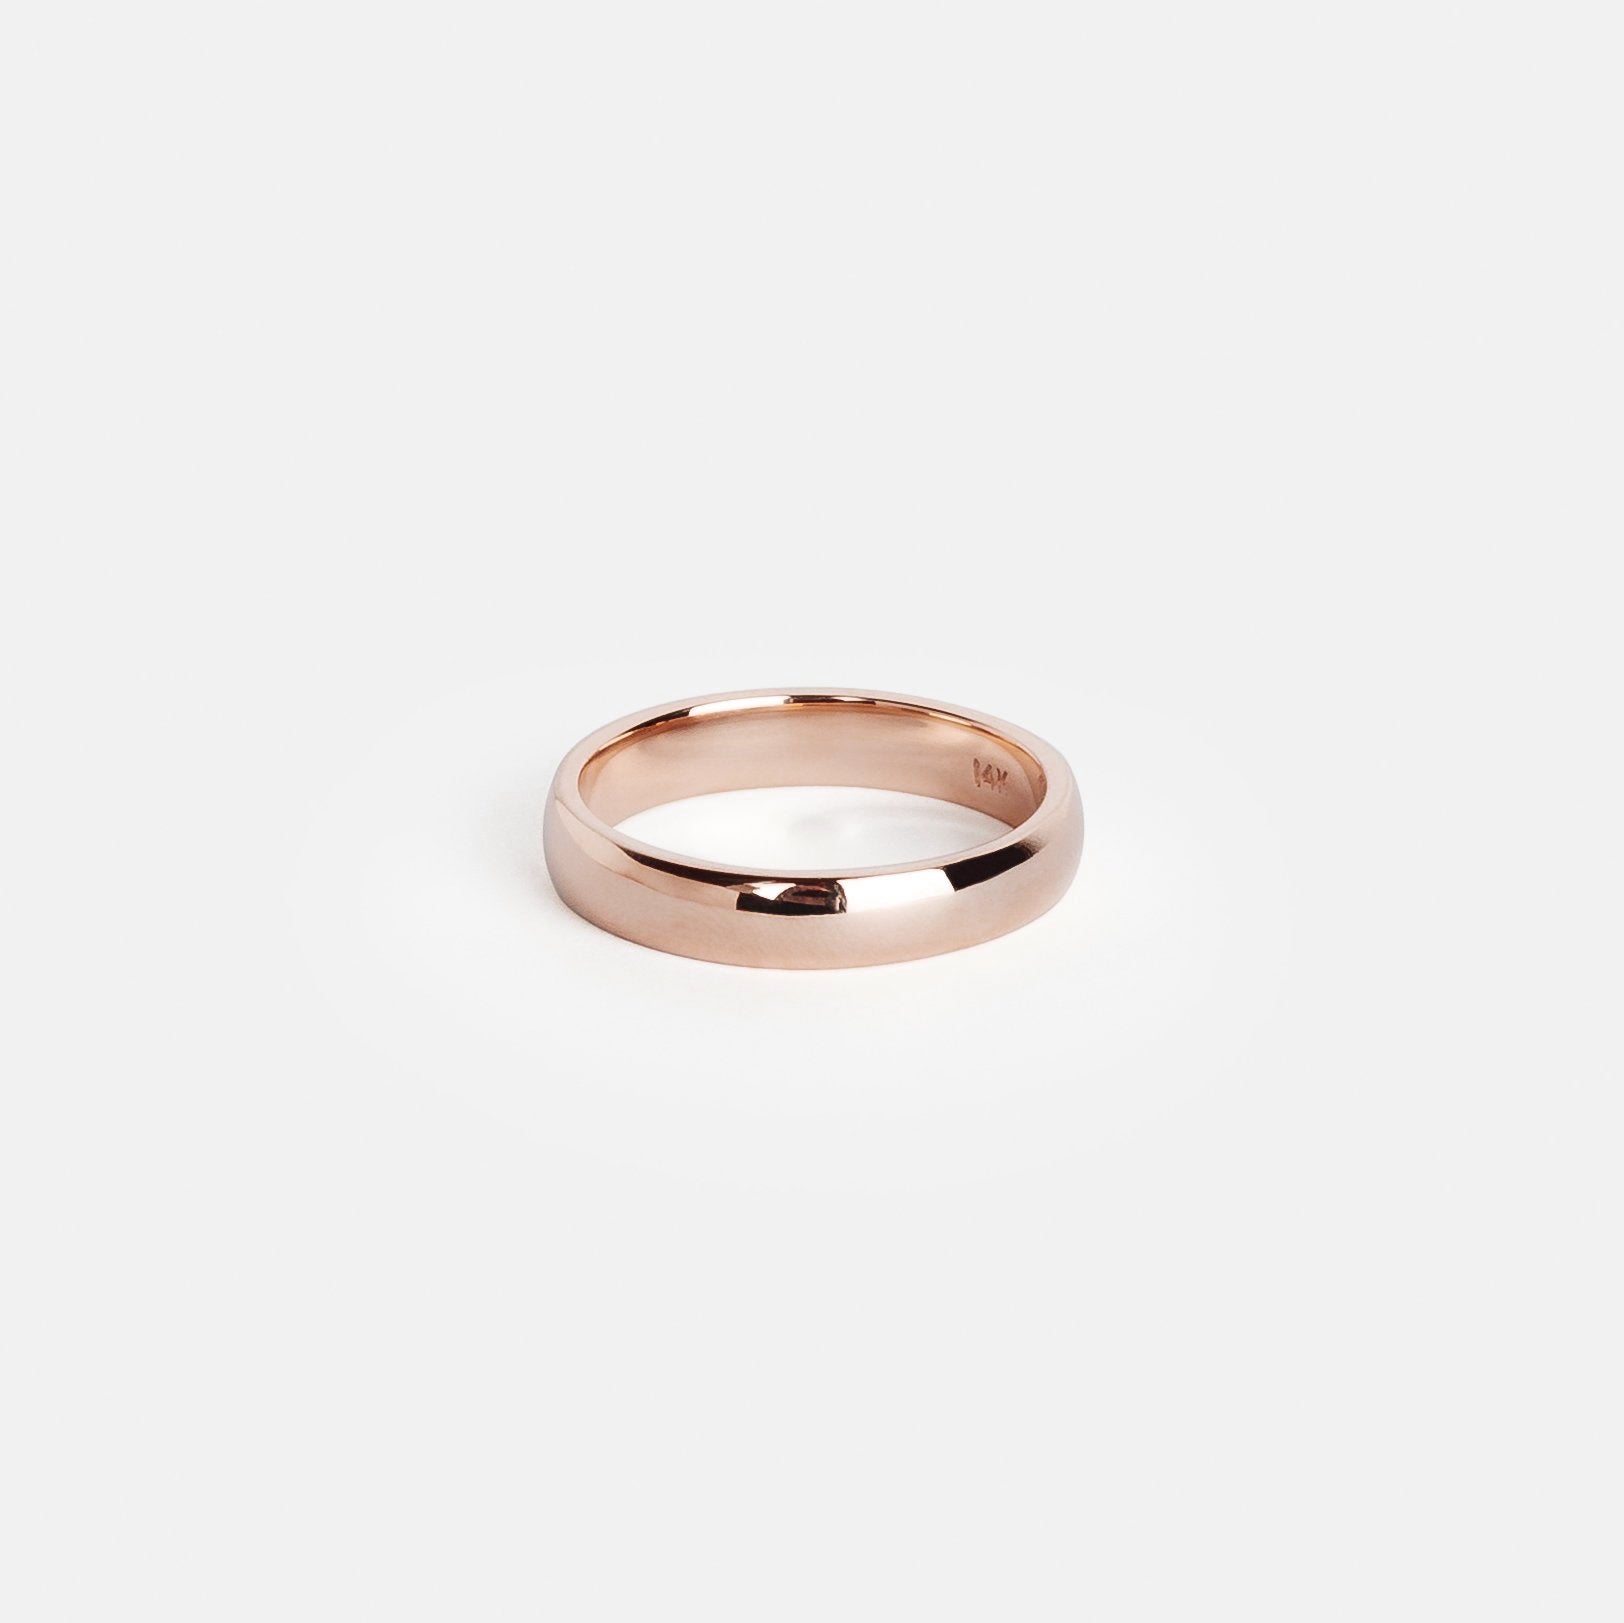 4mm Domed Handmade Band in 14k Rose Gold By SHW Fine Jewelry NYC